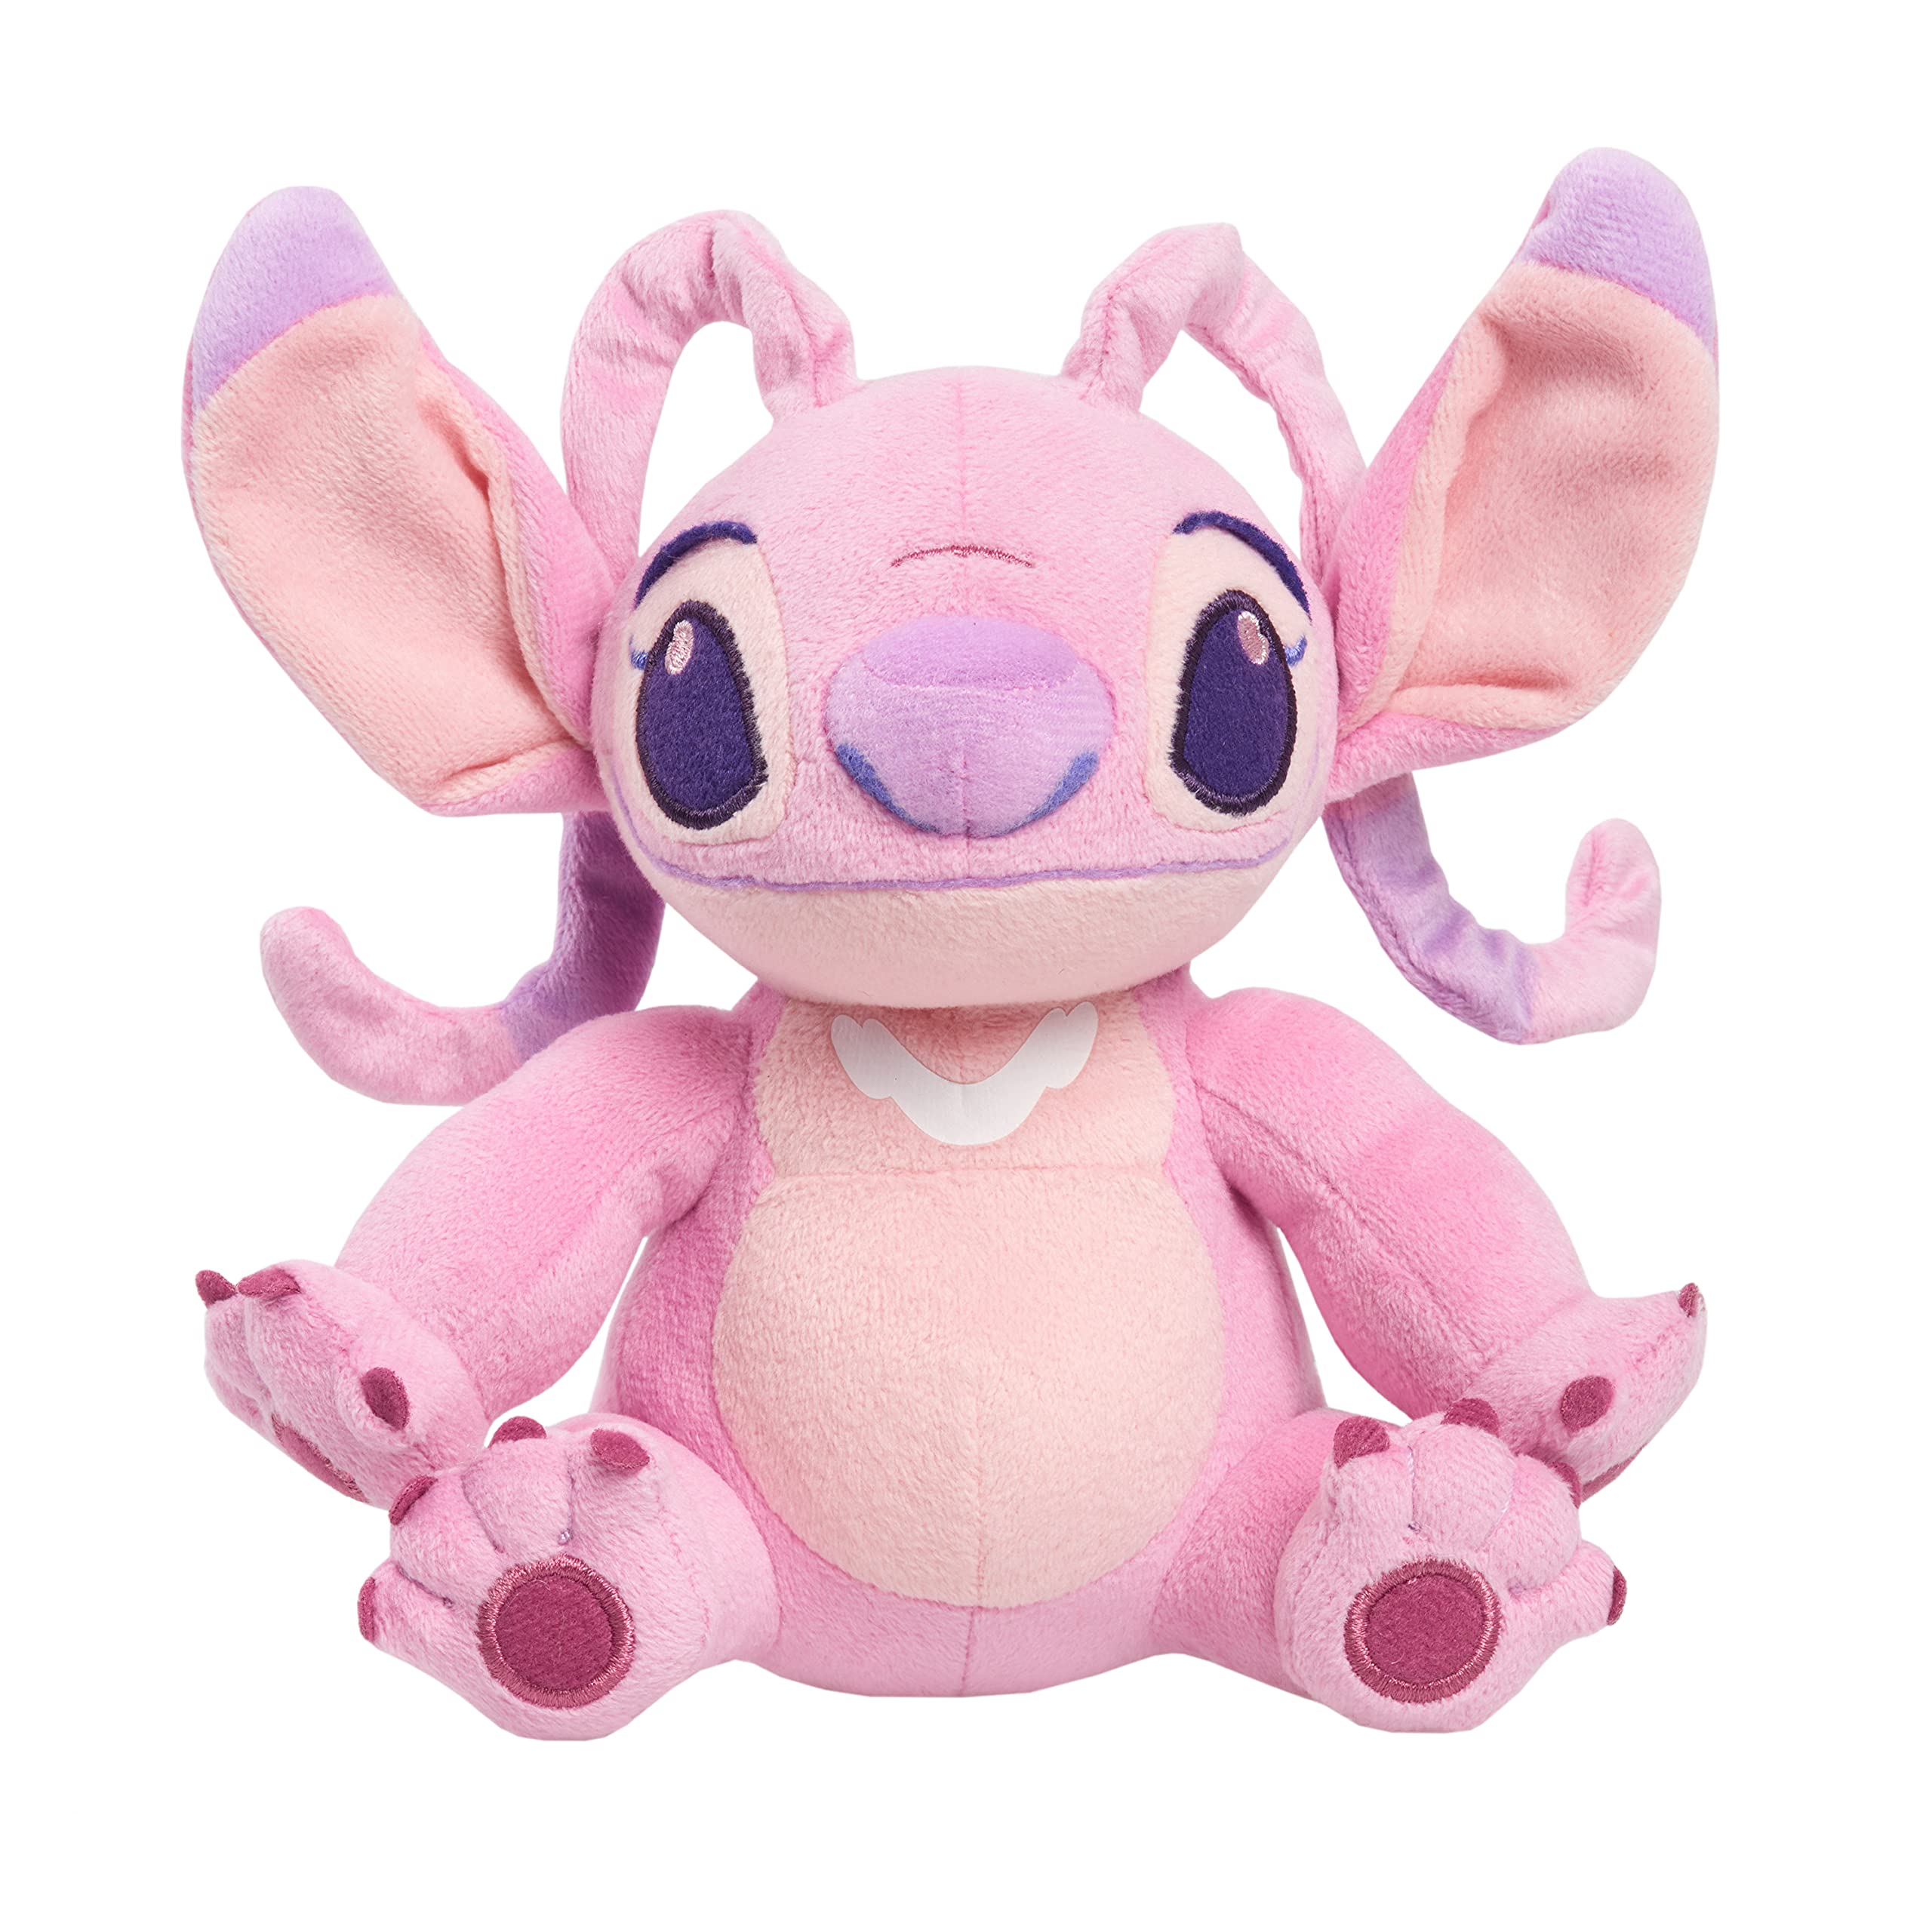 Disney Lilo & Stitch 6-Inch Bean Plushie Angel, Stuffed Animal, Alien,  Officially Licensed Kids Toys for Ages 2 Up by Just Play